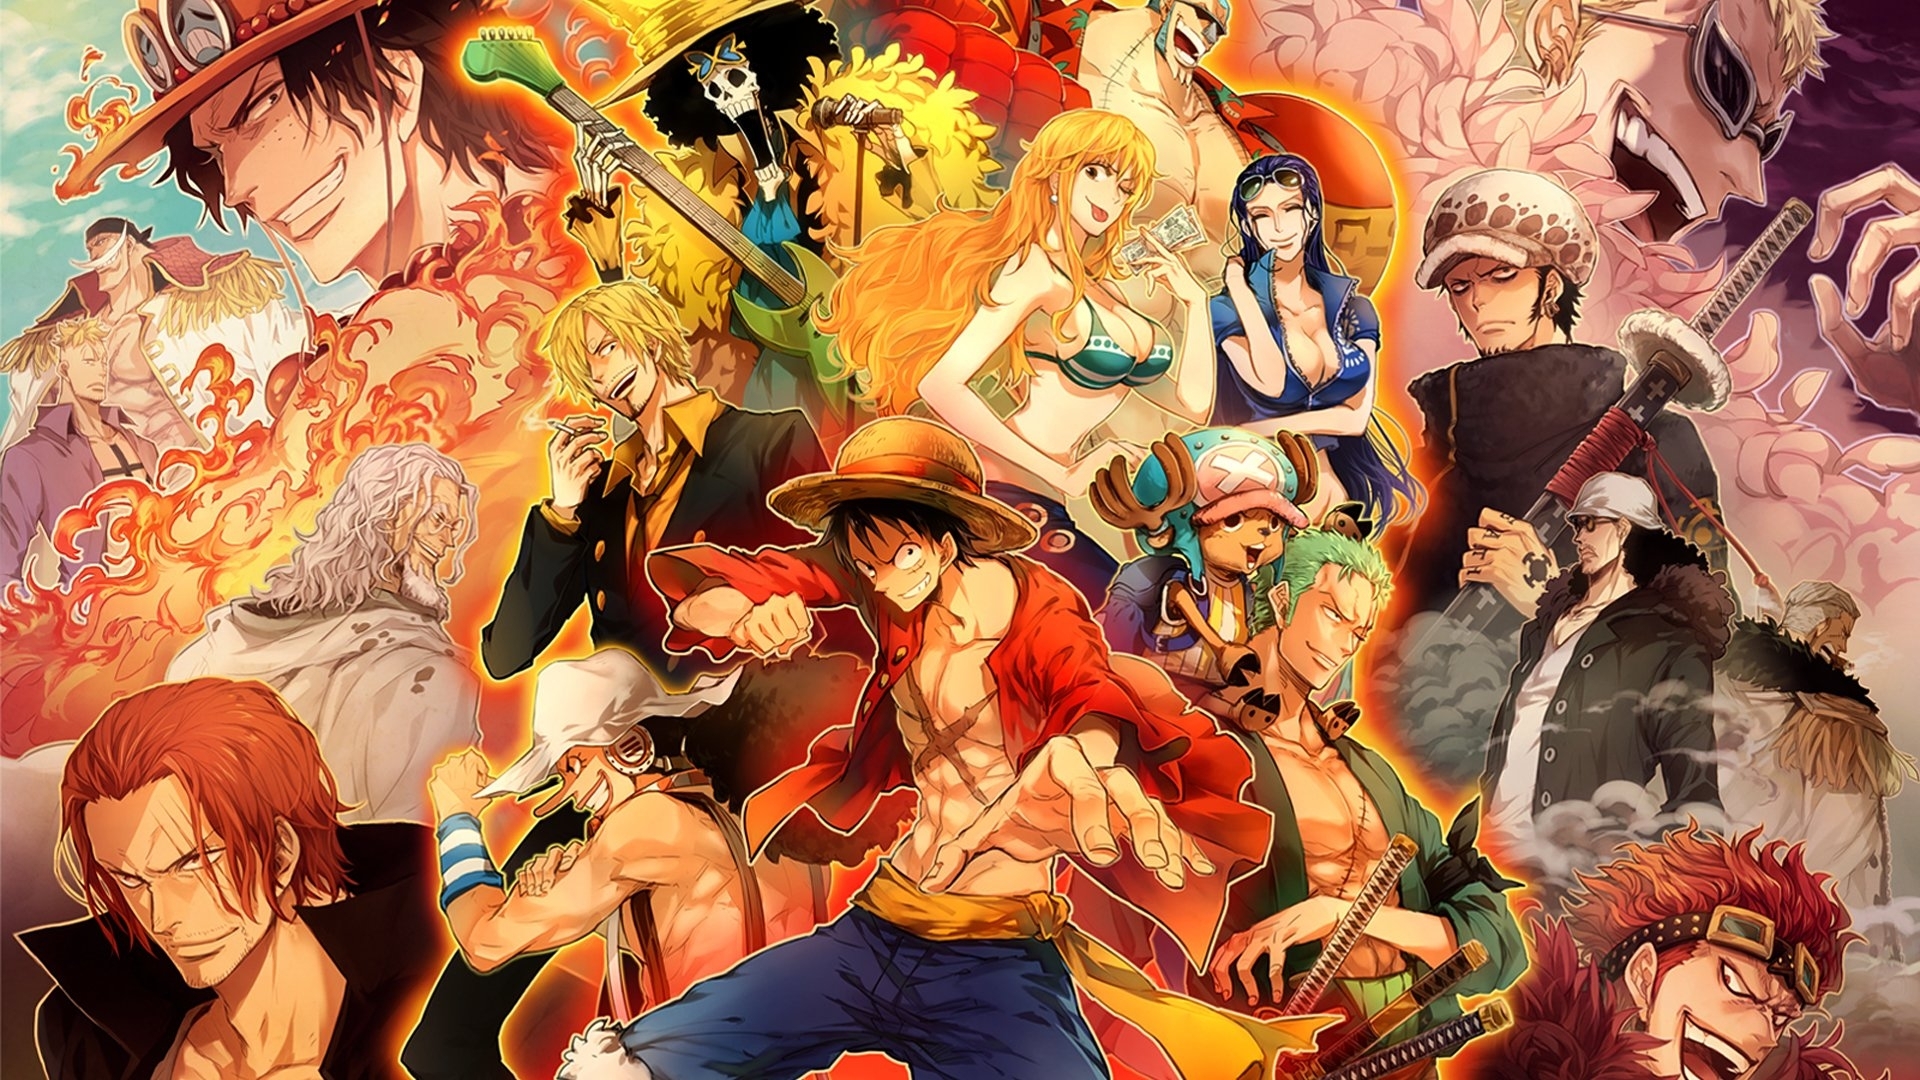 10 Best One Piece Anime Wallpaper FULL HD 1920×1080 For PC Background